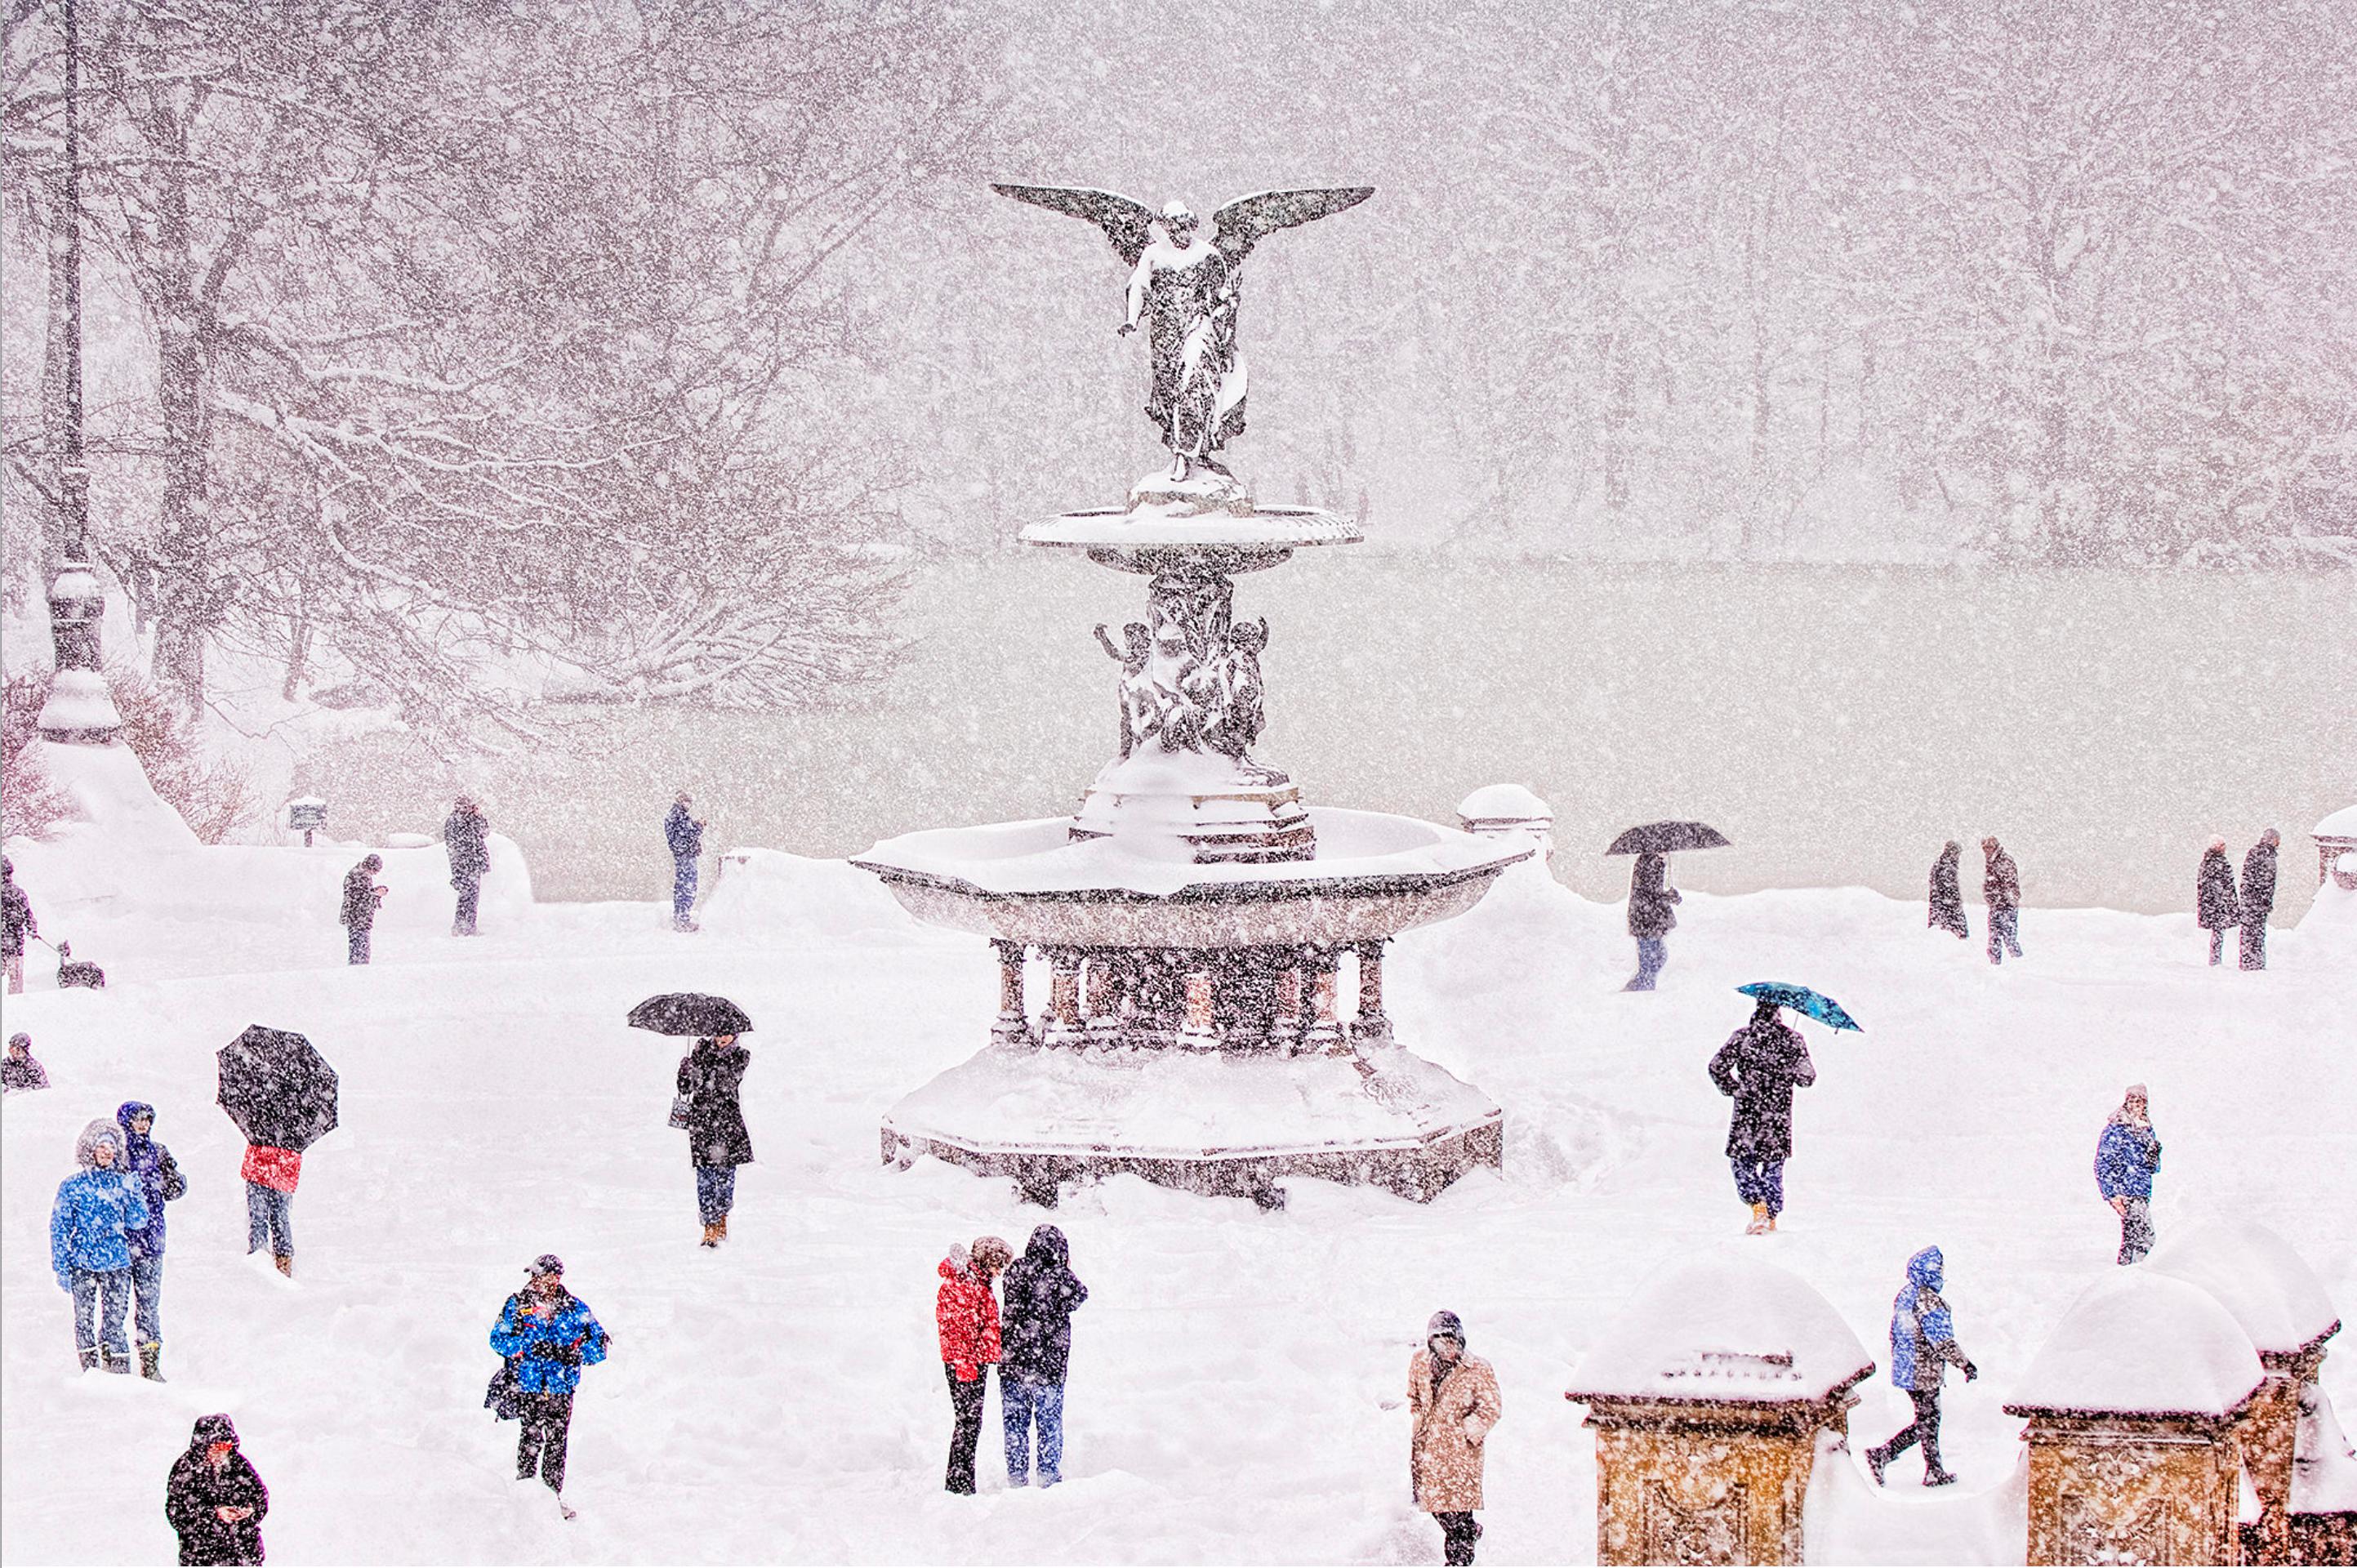 Mitchell Funk - The Bethesda Terrace And Fountain In Snow, Central Park,  New York City